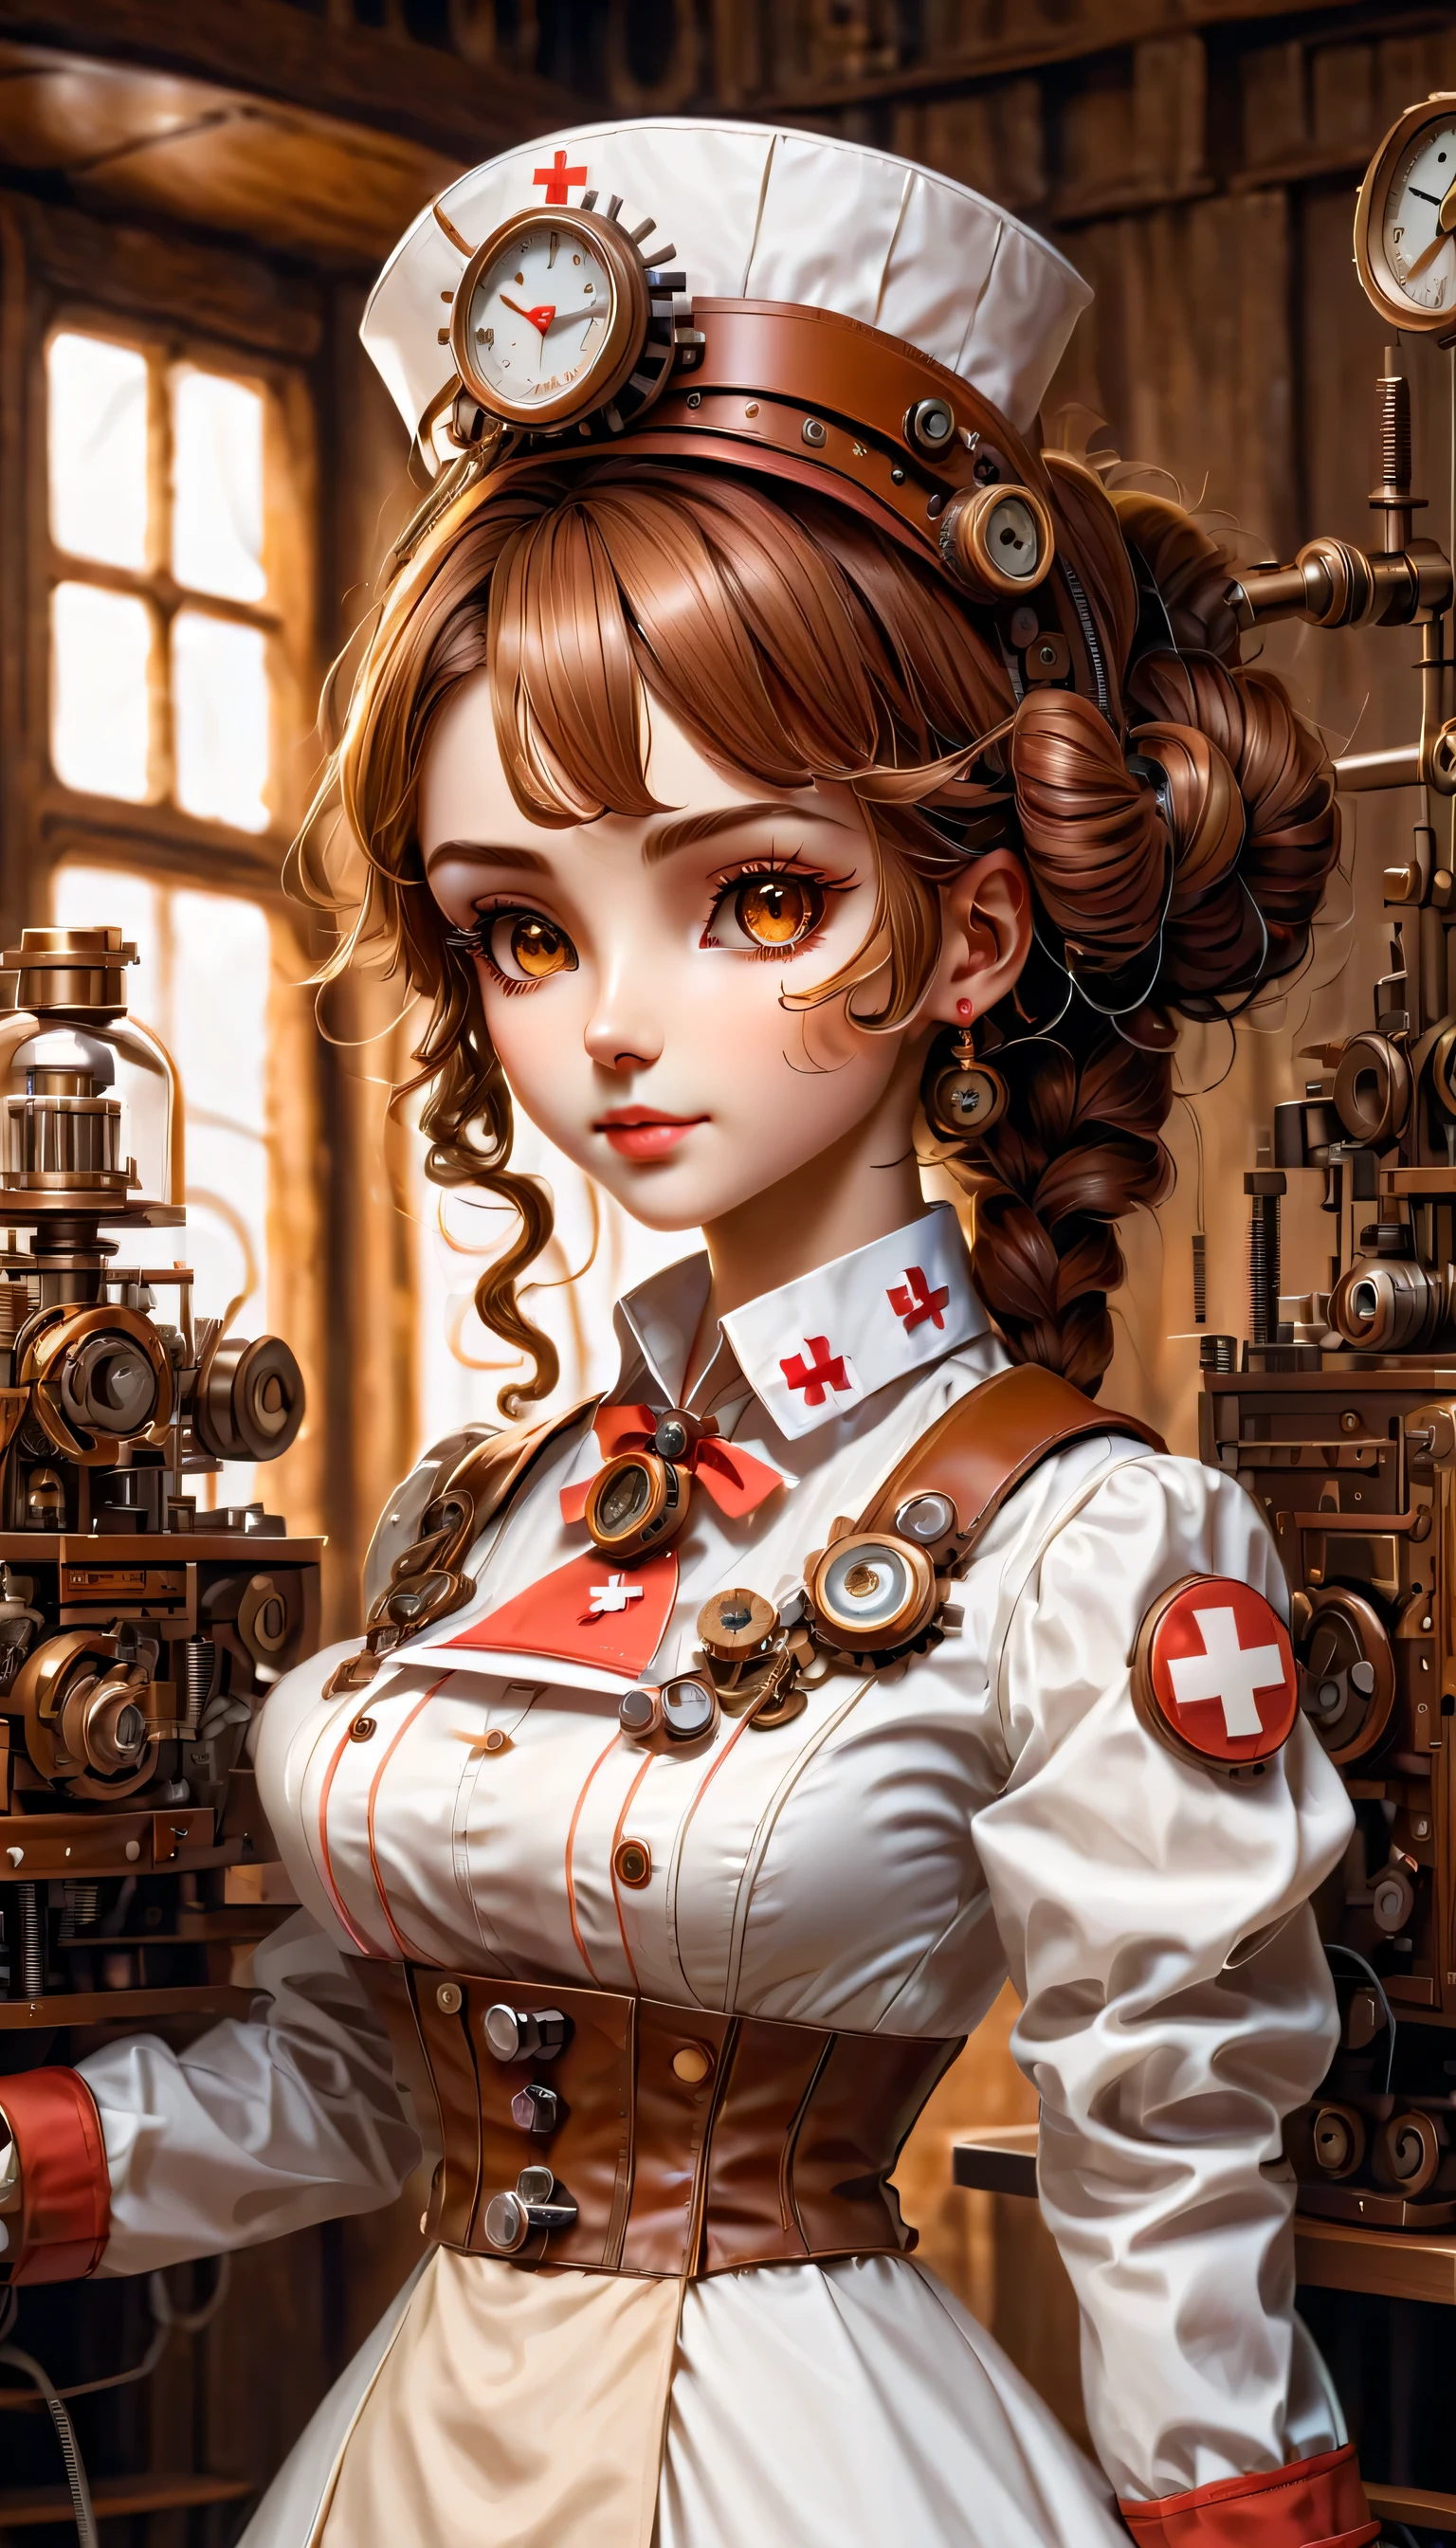 mechanism:humanoid:nurse:16th century European nurse uniform:whole body,doll face:perfect face:big brown eyes,eyelash,hide hair wires,she is made of machinery,Steampunk element,Mechanical engineering,Mechanically,Mechanical,pop,cute,intricate details,very fine,High resolution,high quality,最high quality,clearly,Be clear,beautiful light and shadow,Three dimensions,adorable appearance,complex configuration,mechanism,dynamic,busy,Work hard,An expression that makes you want to support,Medical equipment,medical supplies shelf,vial,show evidence that it is a machine,light from window